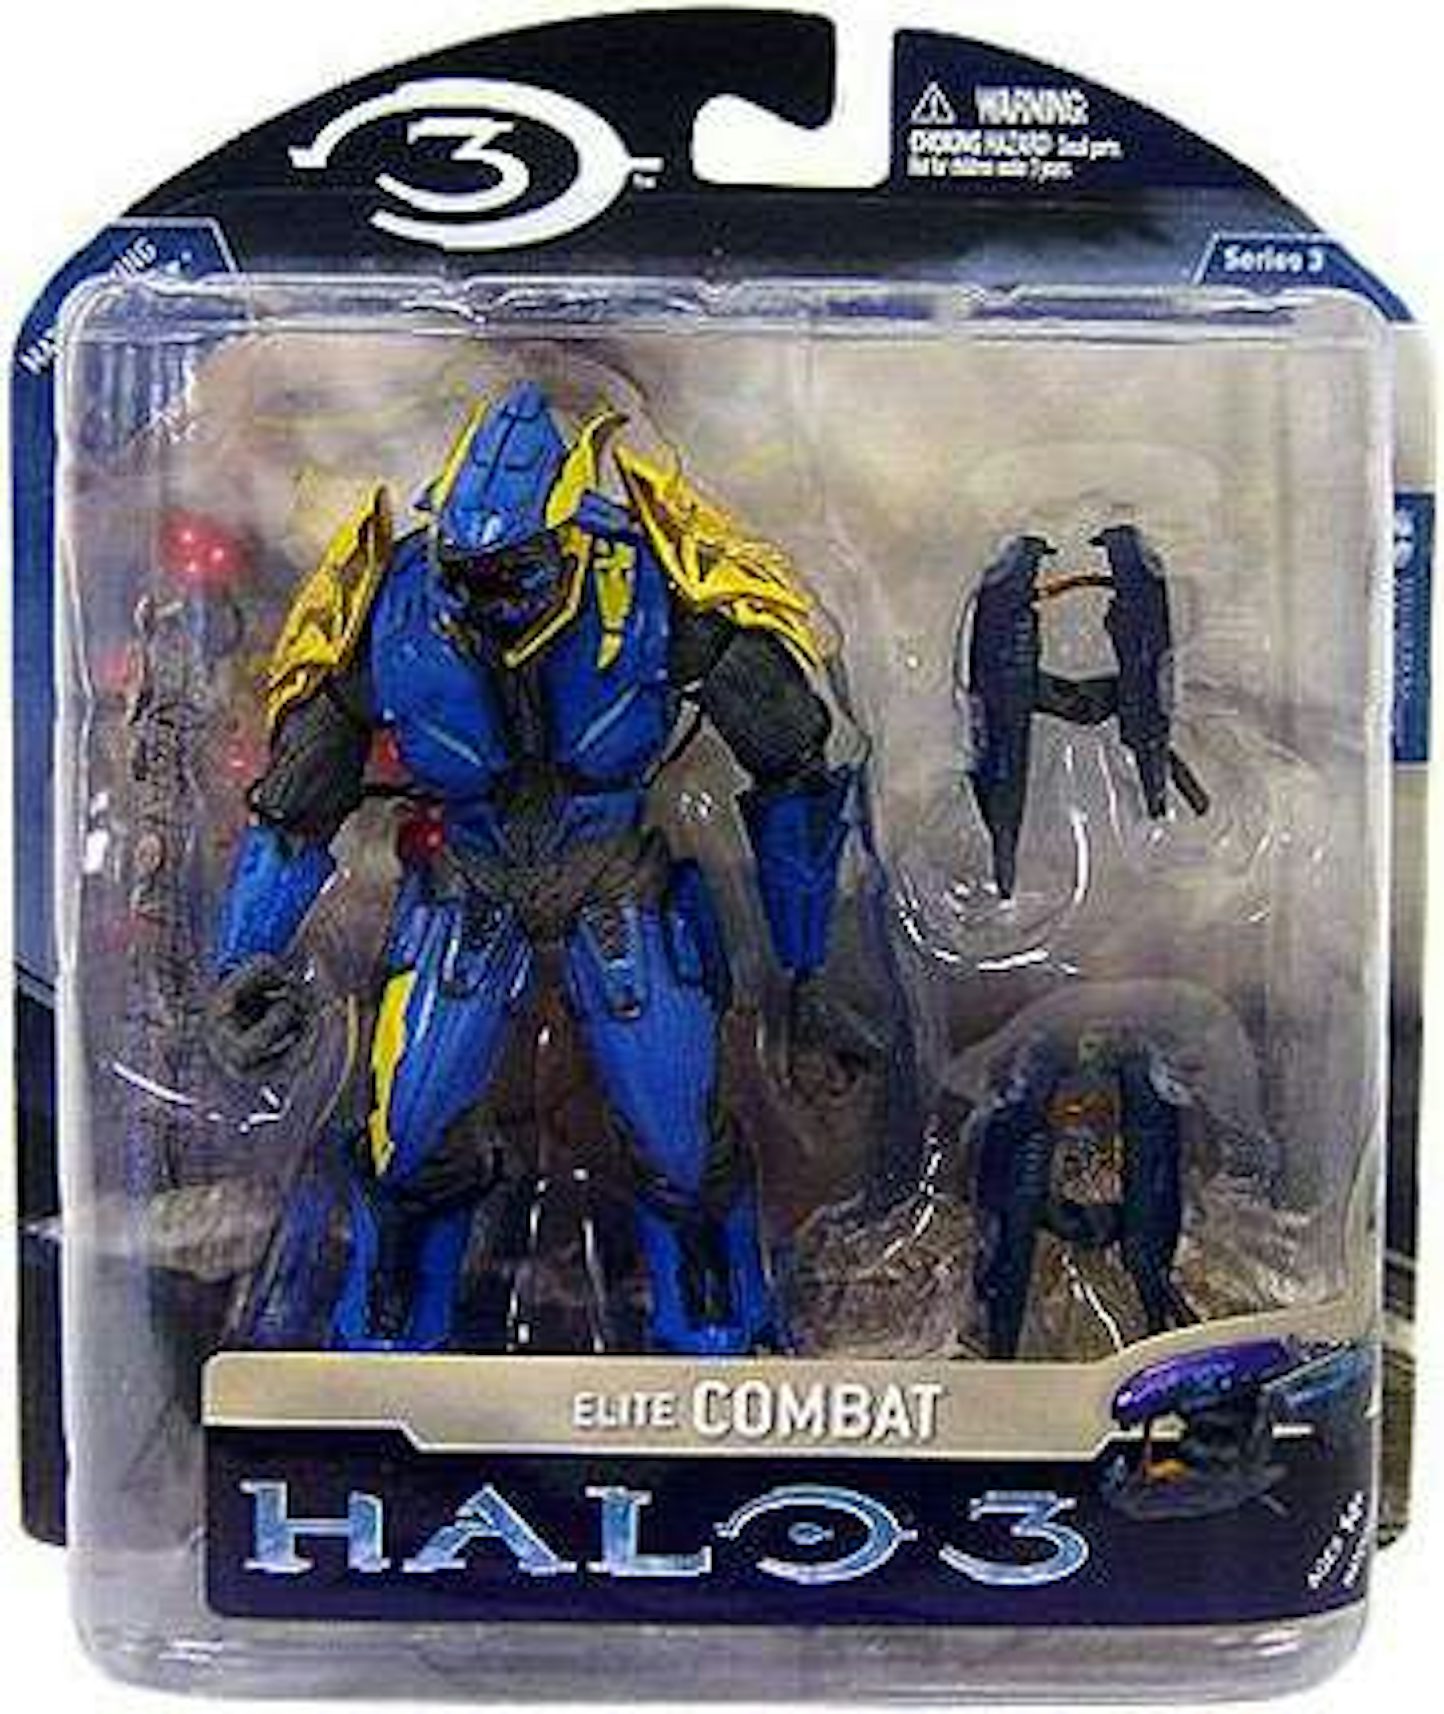 McFarlane Toys Halo Anniversary Series 2 - The Package Master